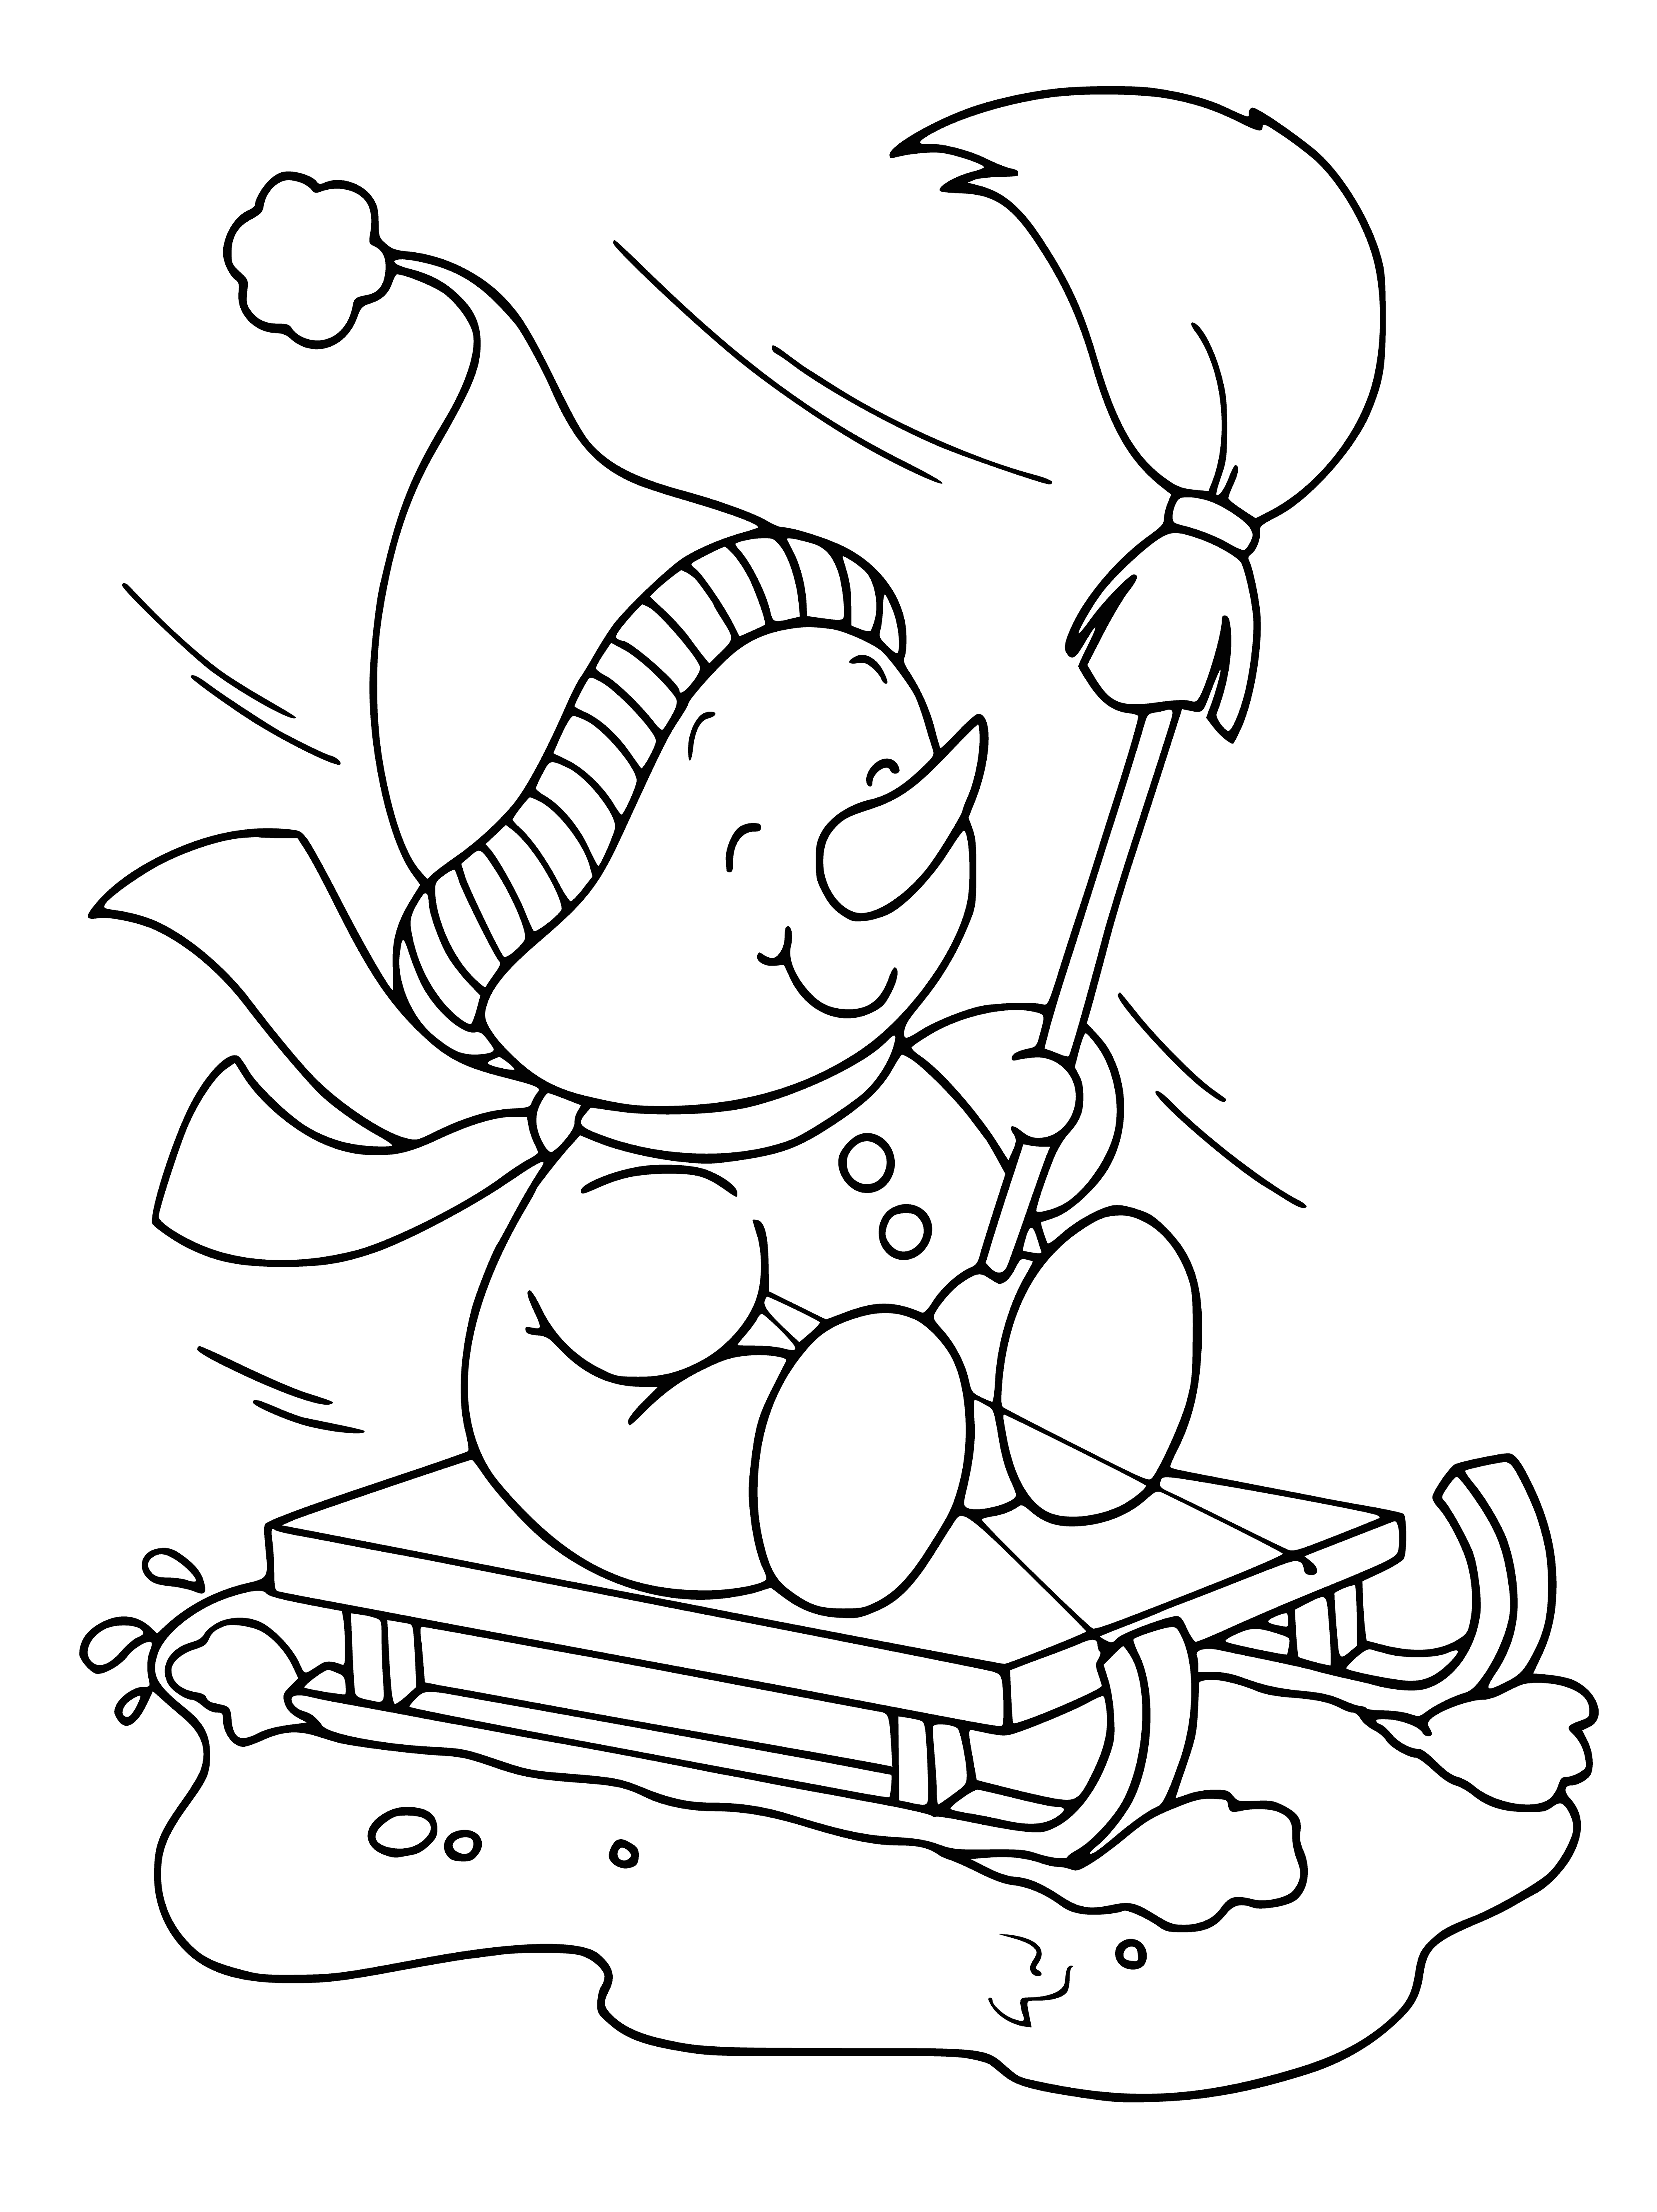 coloring page: A snowman is sledding with a dog, a carrot nose, coal button eyes, and a black top hat. #SleddingFun